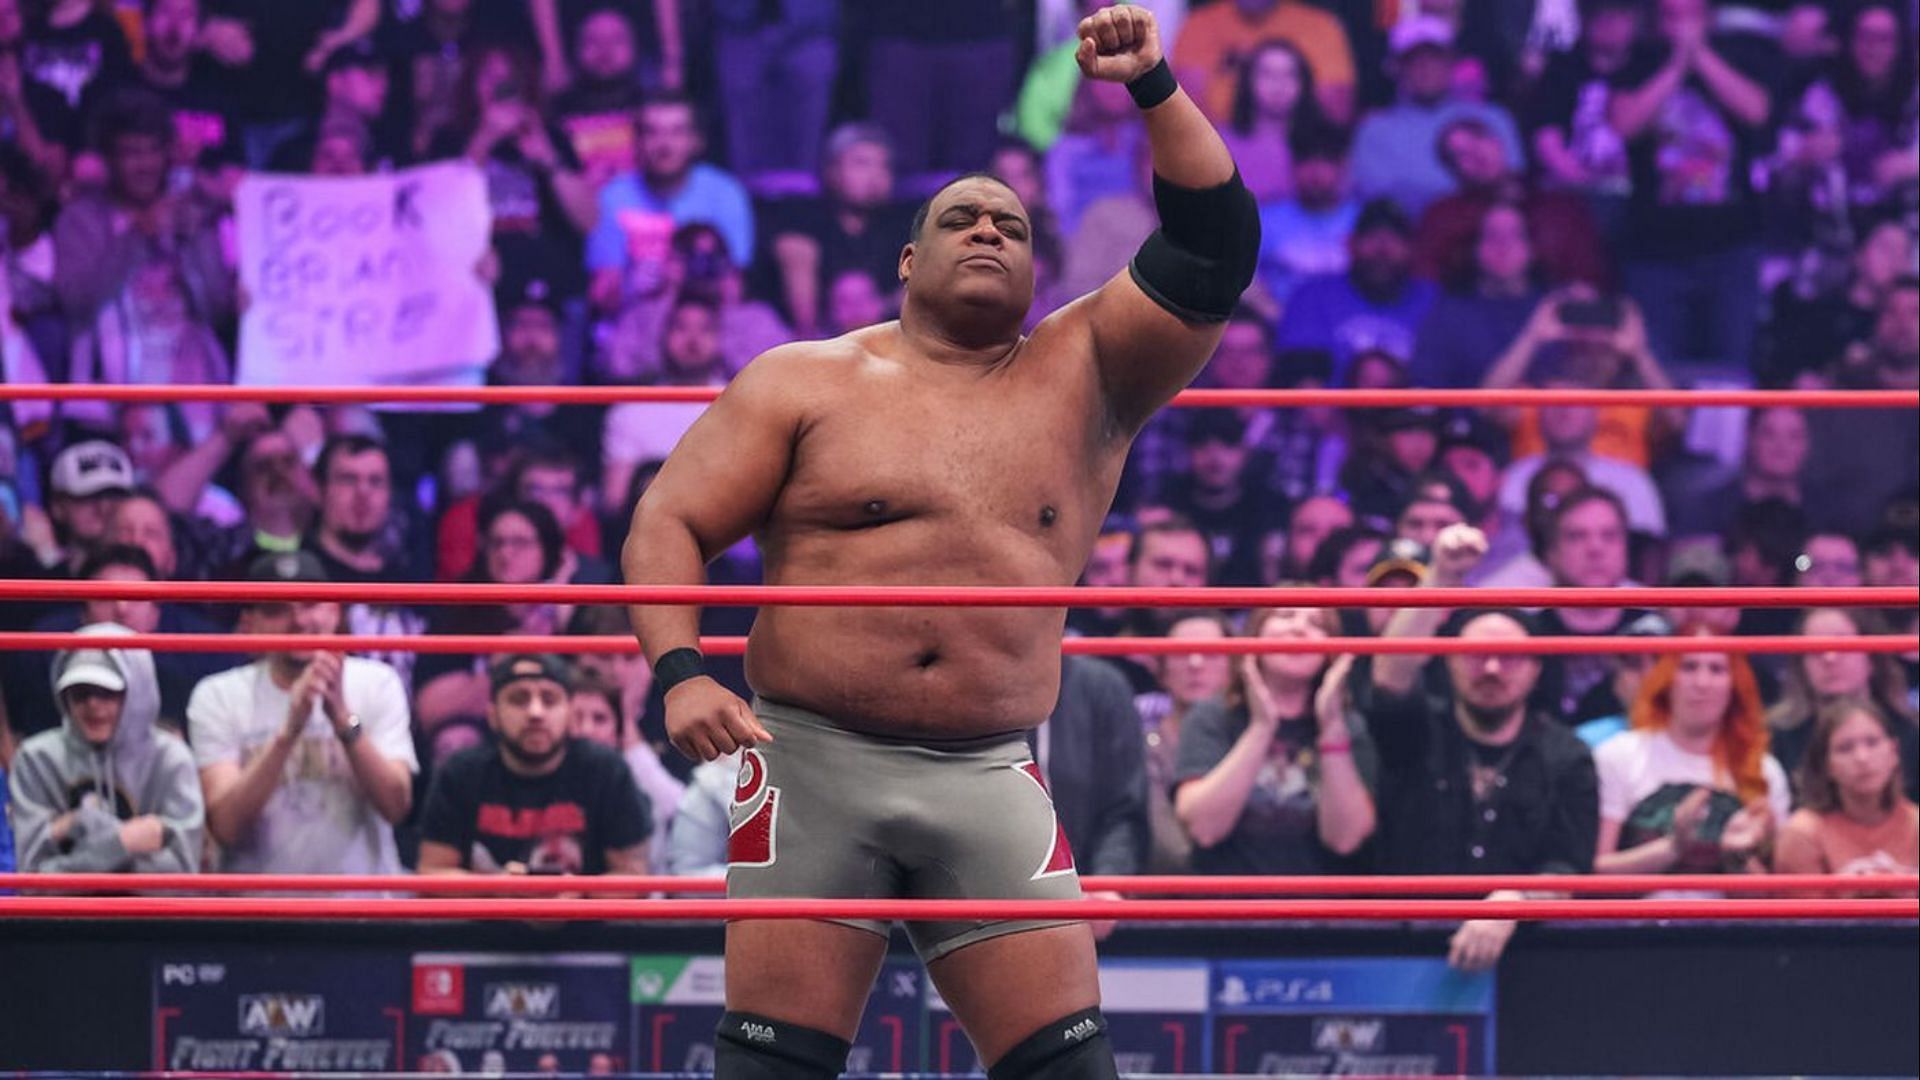 Keith Lee was not cleared to compete at Worlds End